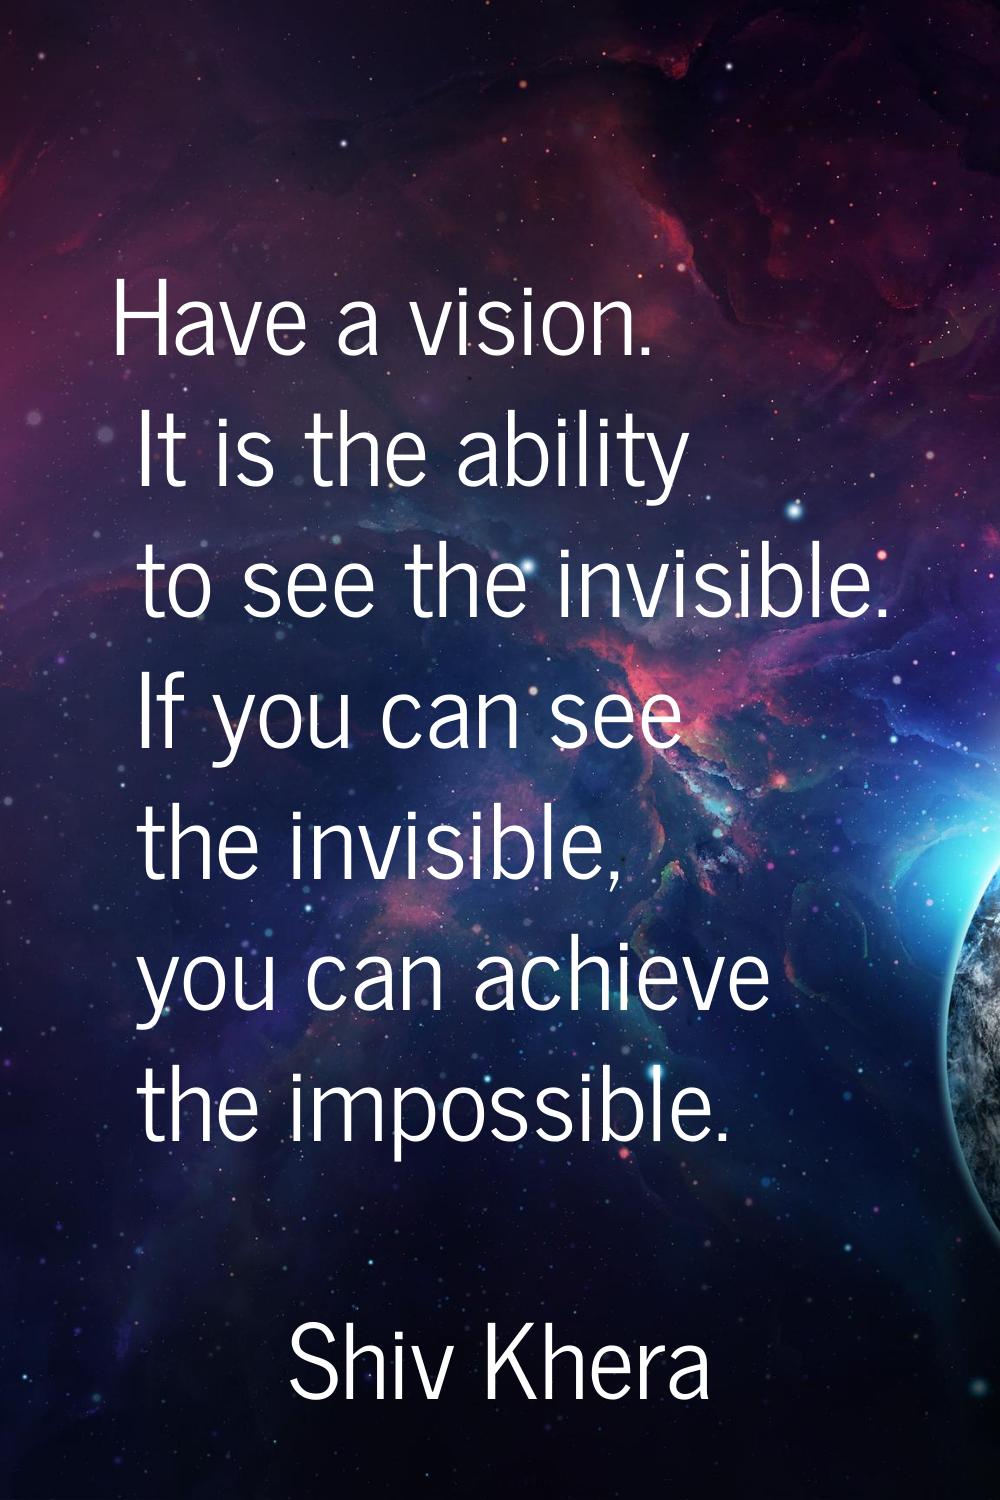 Have a vision. It is the ability to see the invisible. If you can see the invisible, you can achiev